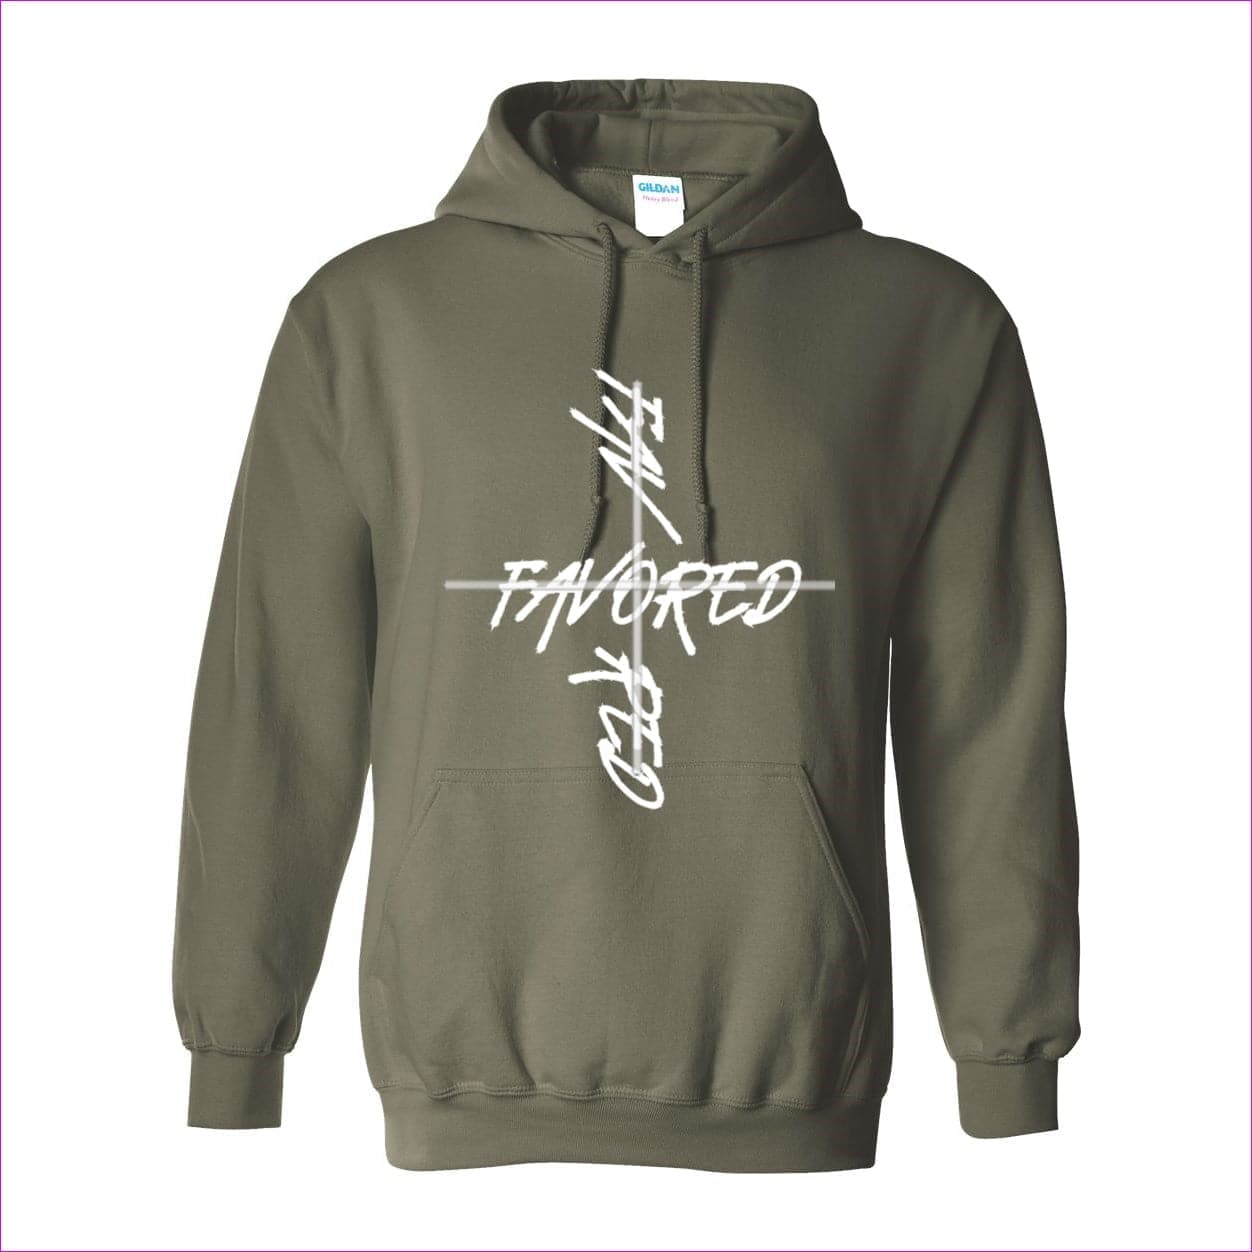 Military Green Favored 2 Unisex Heavy Blend Hooded Sweatshirt - unisex hoodies at TFC&H Co.